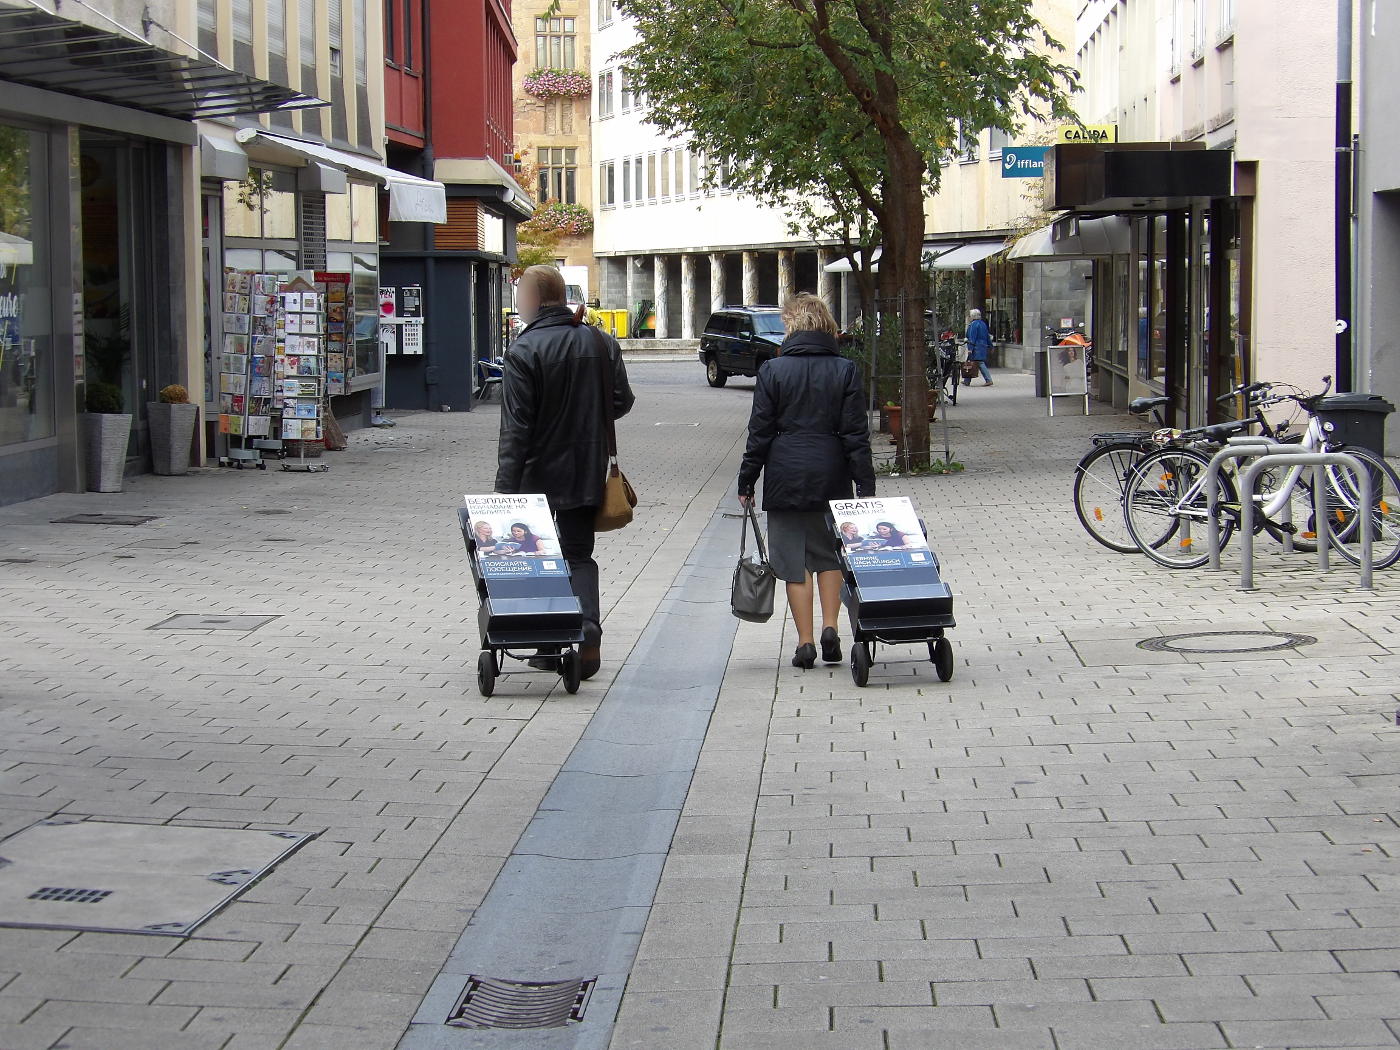 Jehovah's Witnesses in Bruchsal and Heilbronn